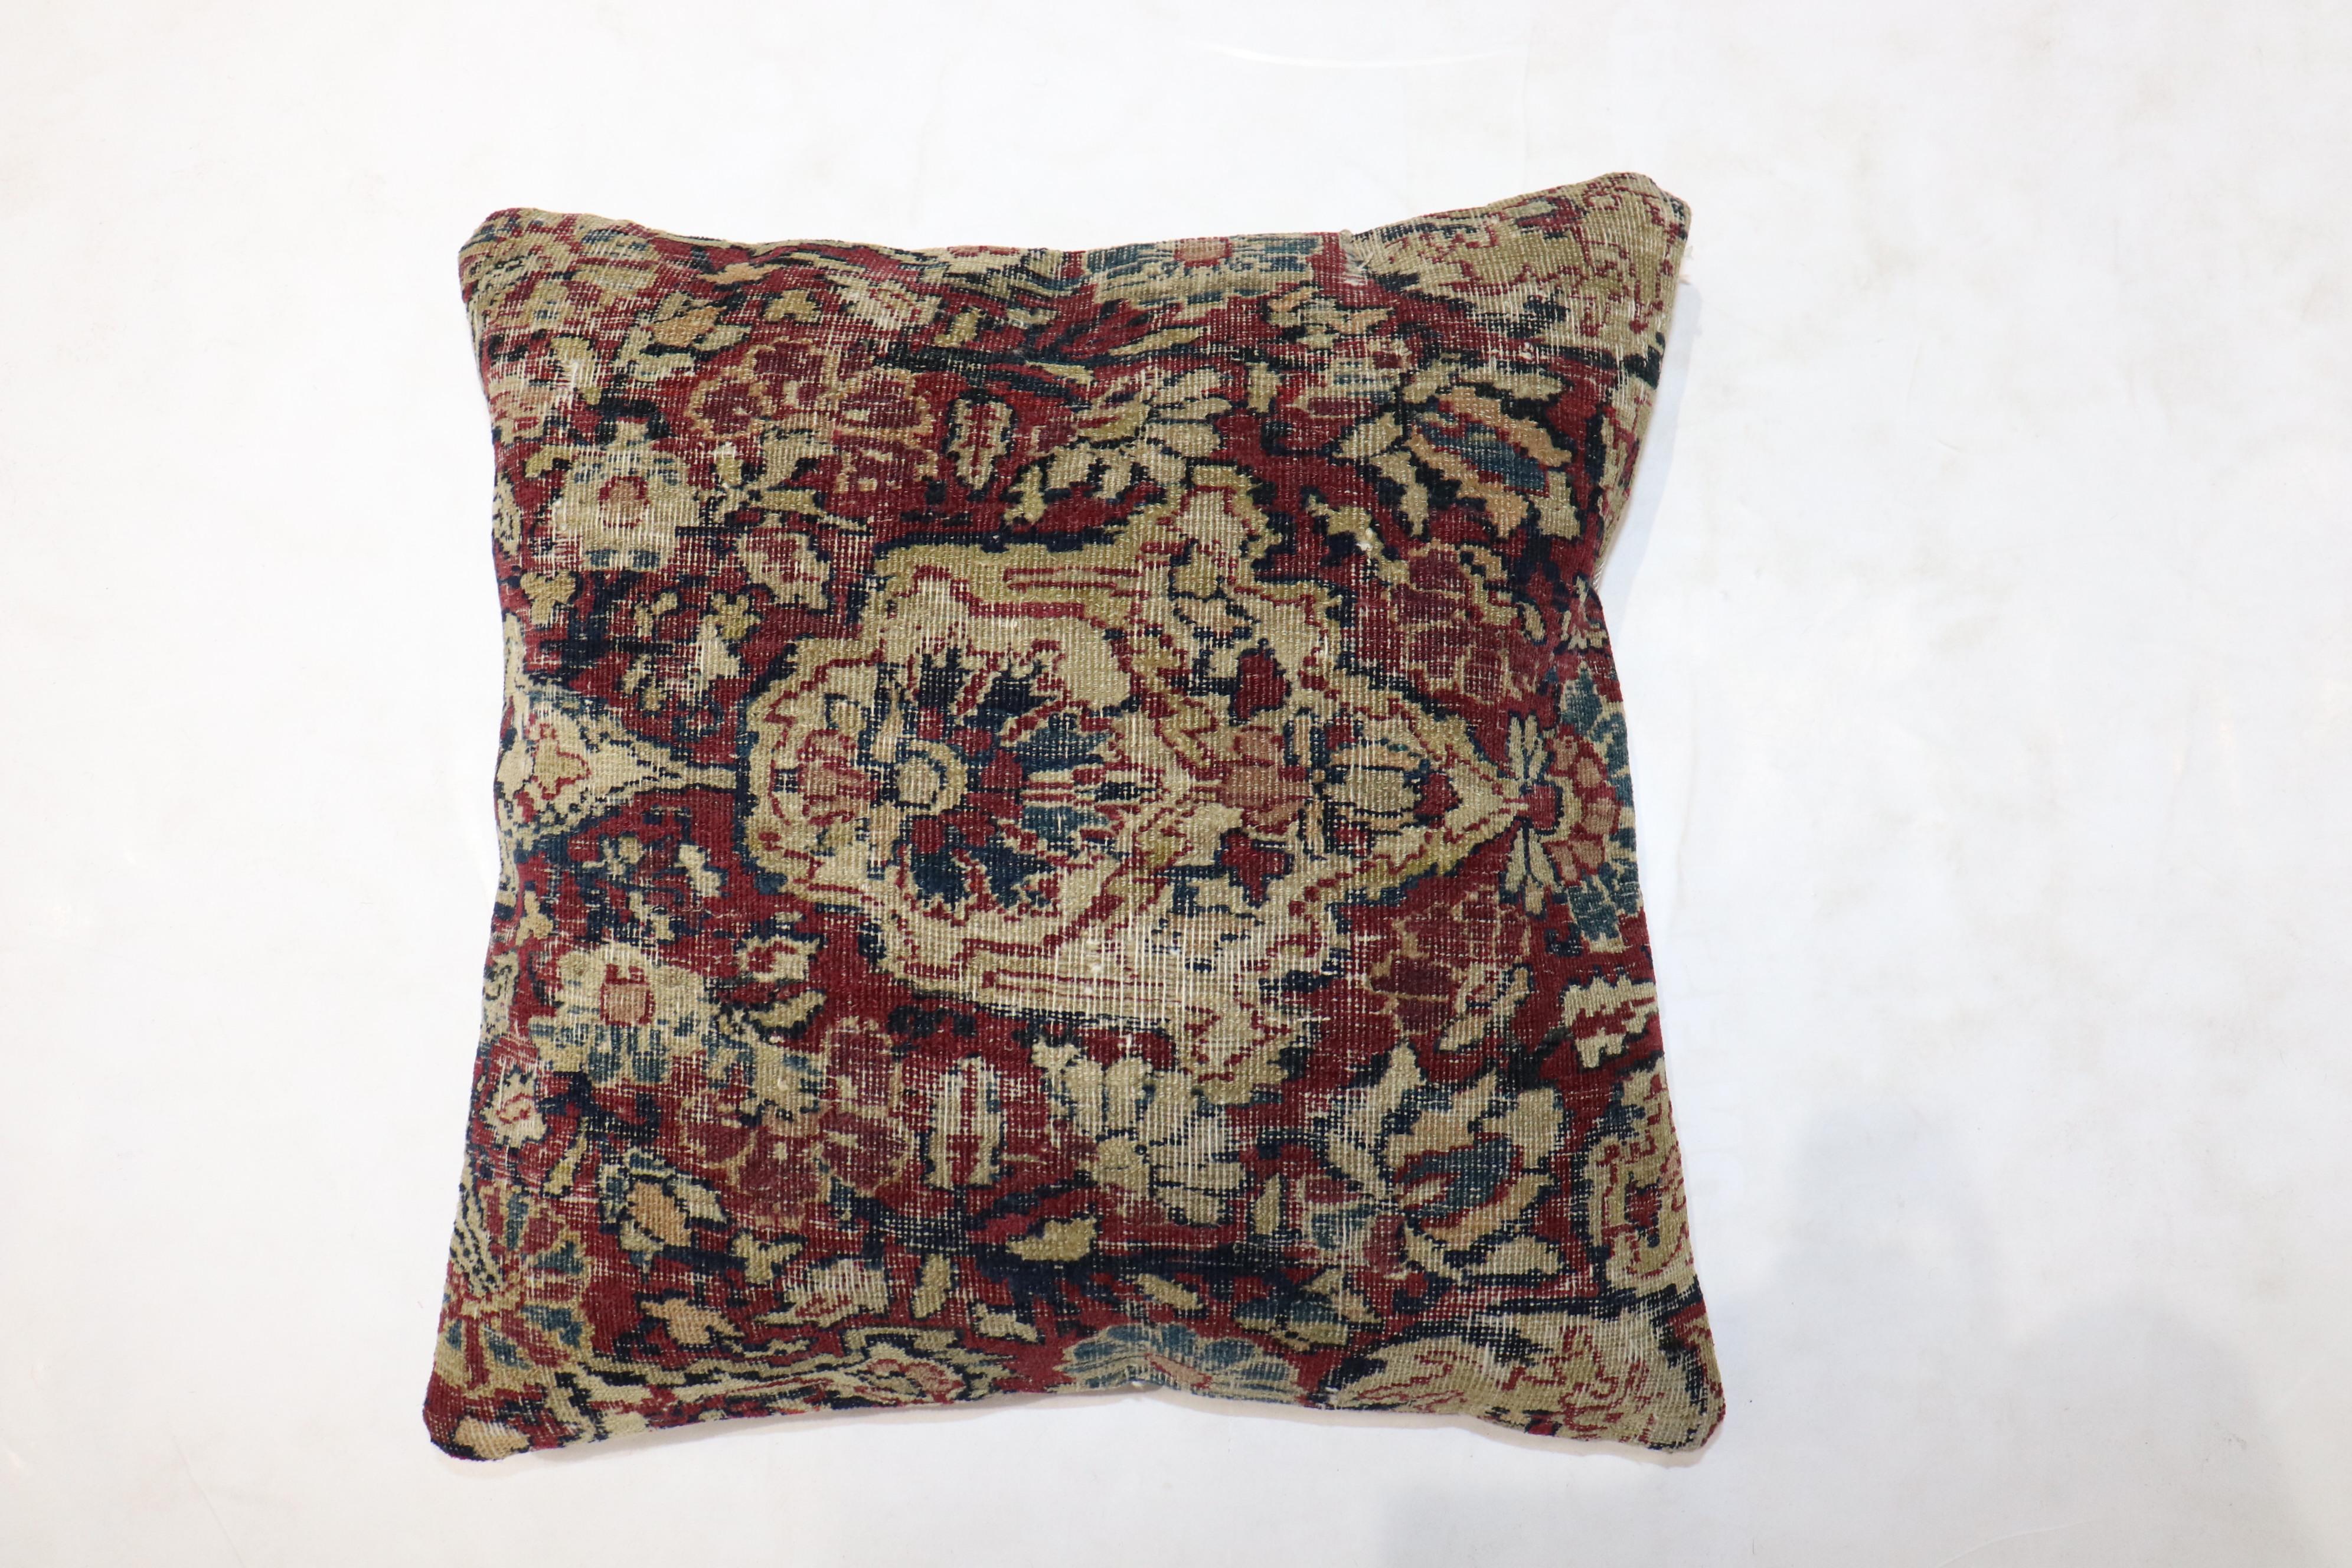 Pillow made from a 19th century Persian Kerman rug. Fill insert and zipper closure provided

Measures: 17